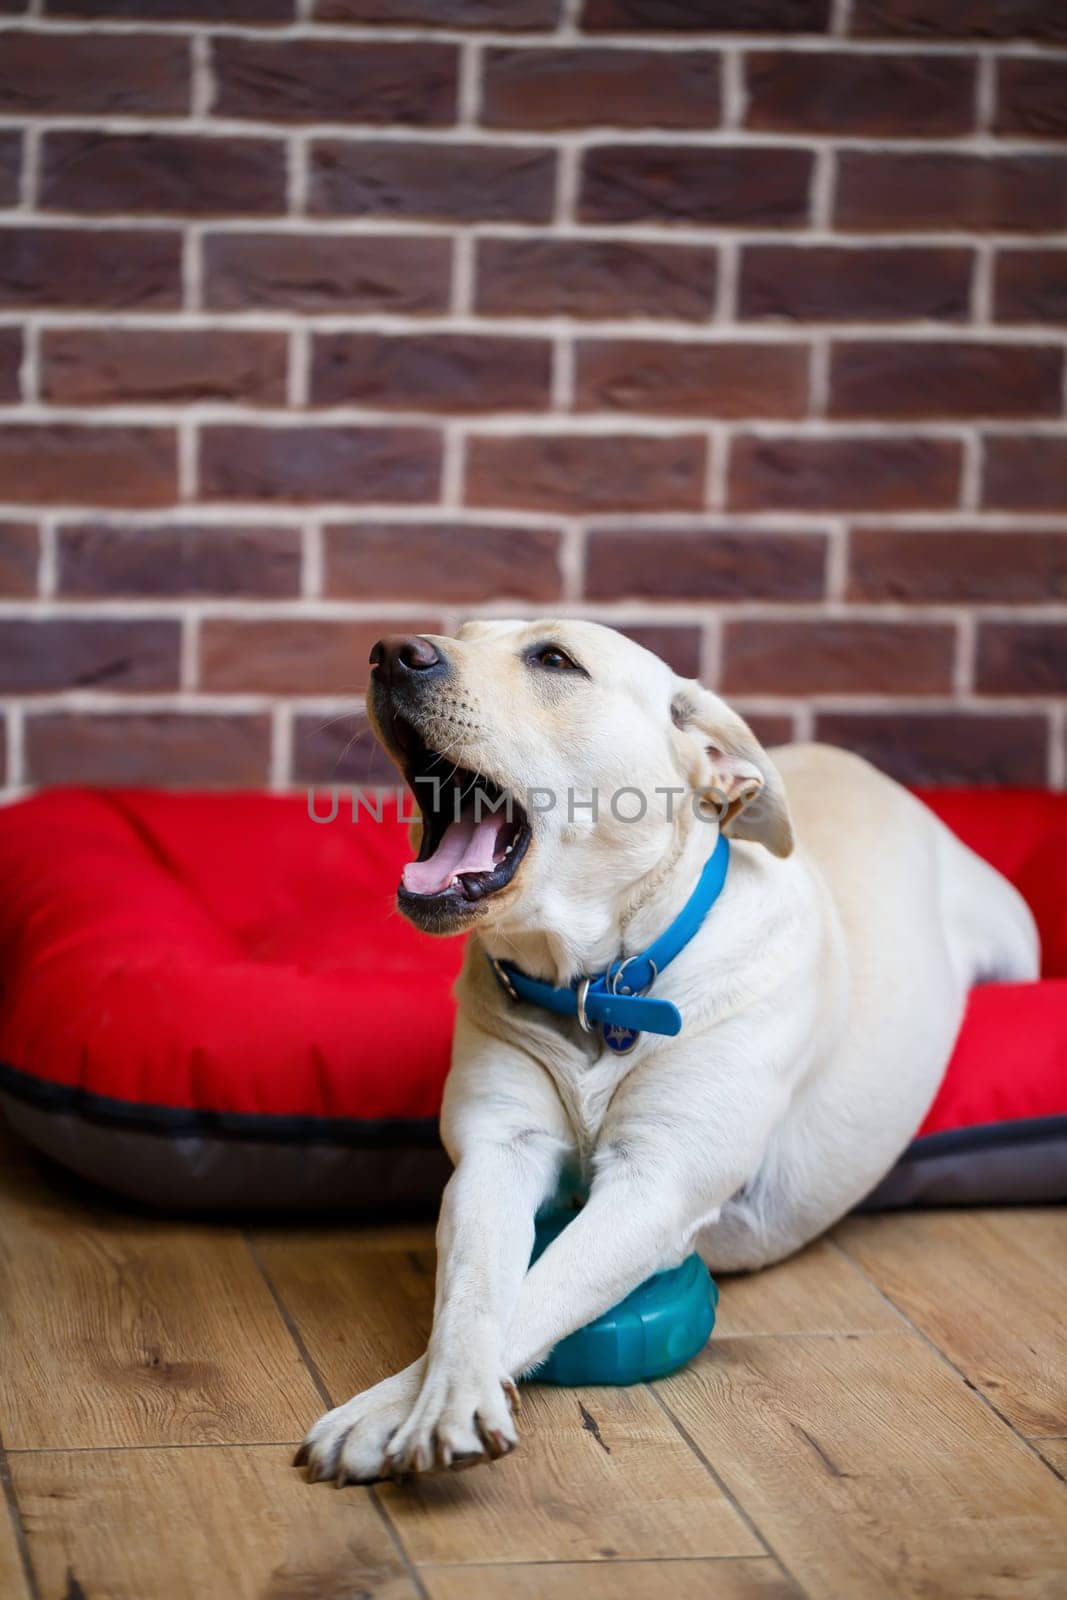 A large dog of light color Labrador coat lying on a red litter